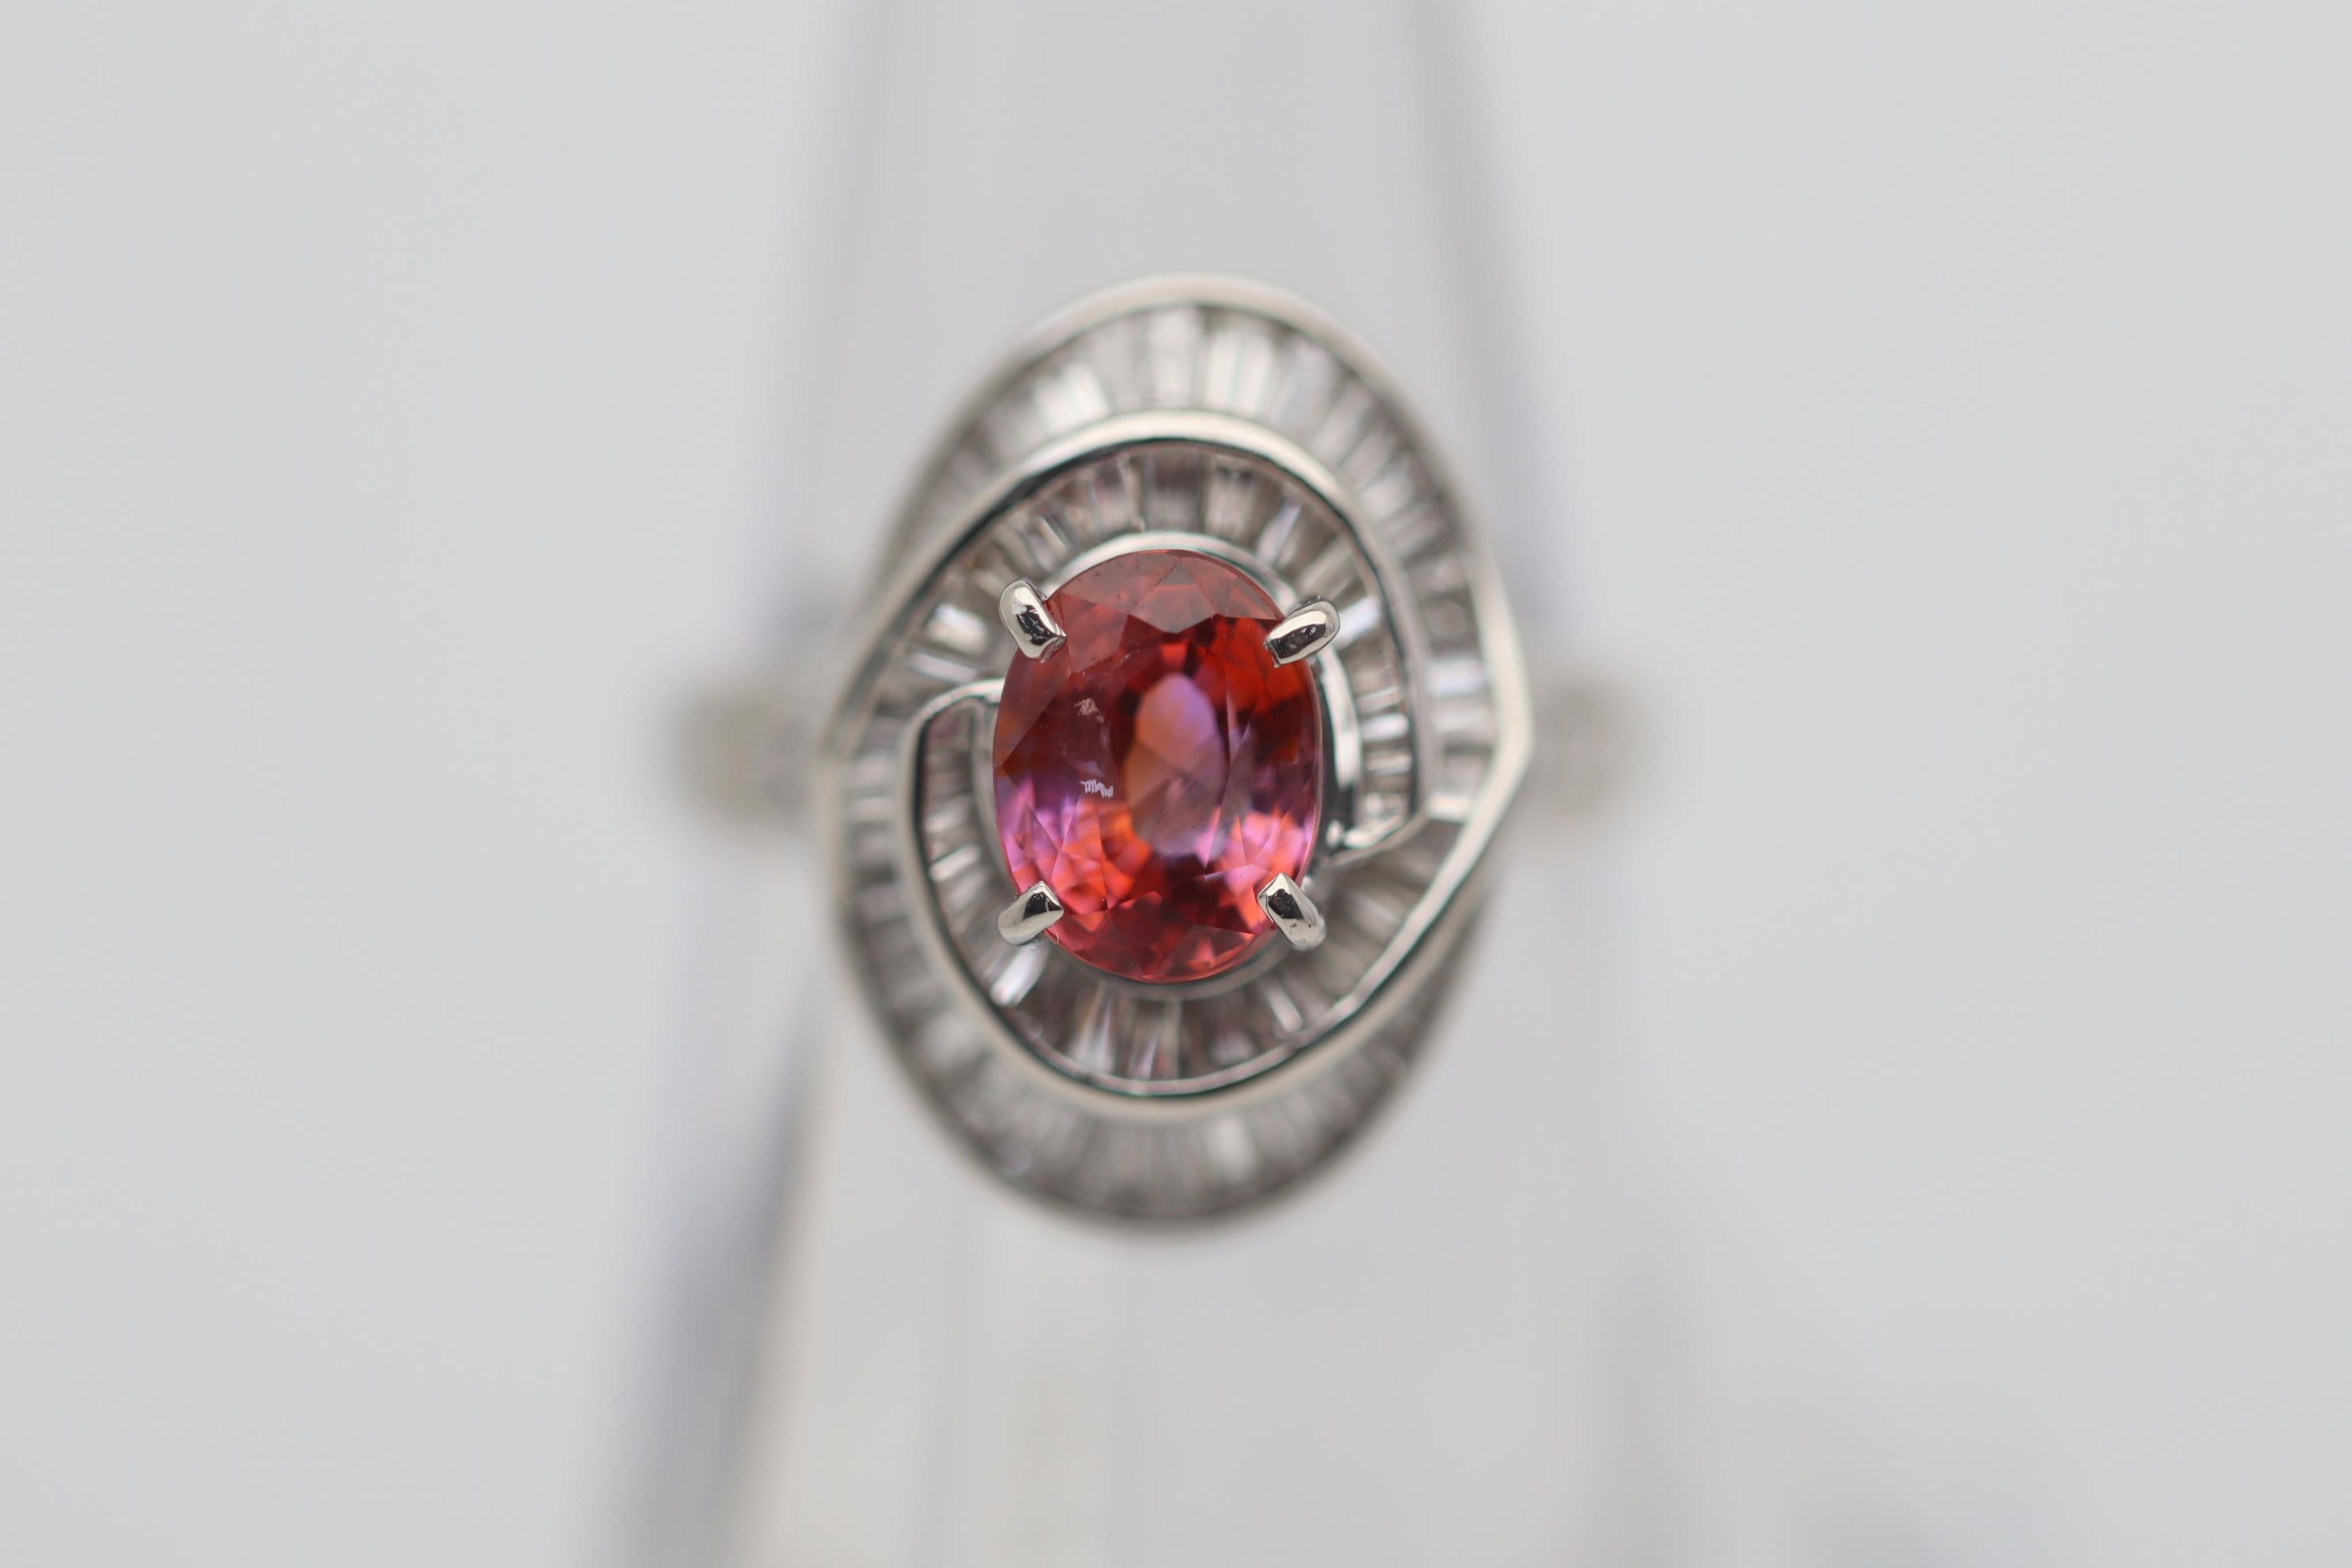 A classic, true gem-quality Ceylon Padparadscha sapphire takes center stage of this platinum made ring. It has the classic pink-orange color which is more intense and vivid then we usually see. The color saturation and brilliance of the stone really